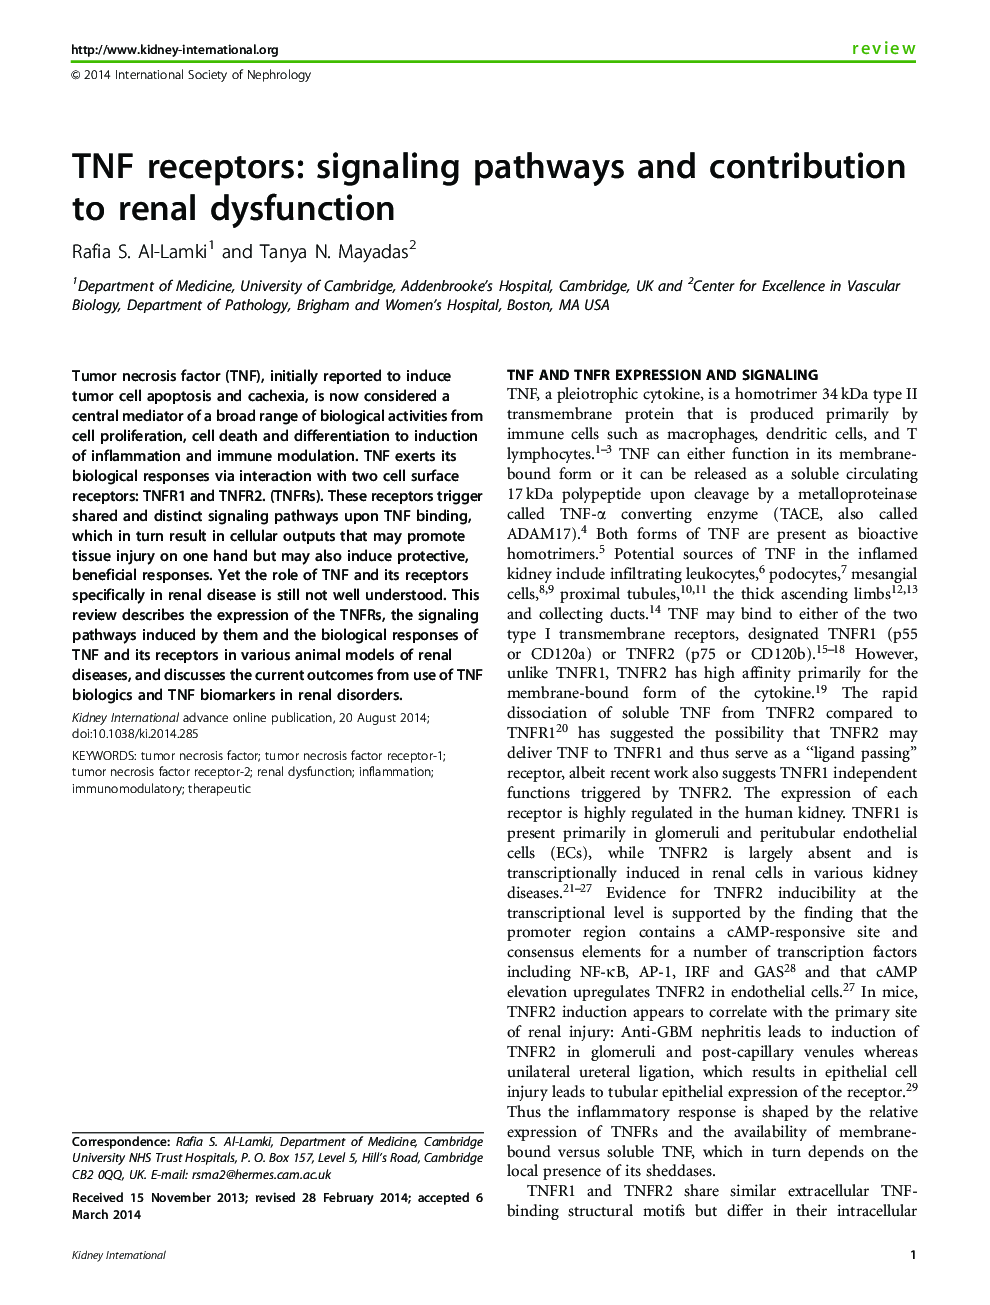 TNF receptors: signaling pathways and contribution to renal dysfunction